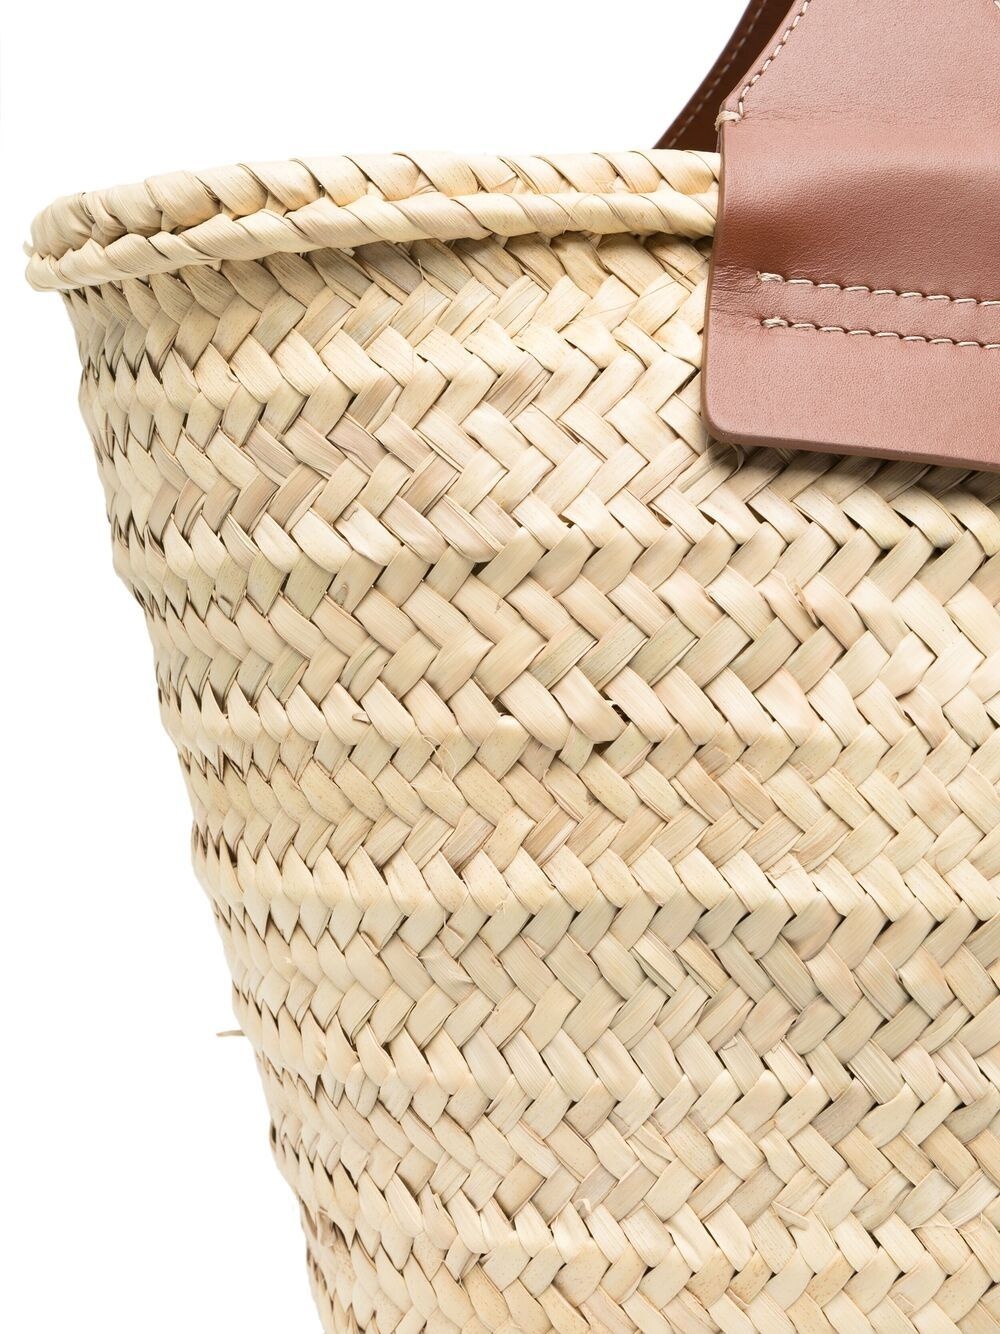 woven-straw tote bag - 4